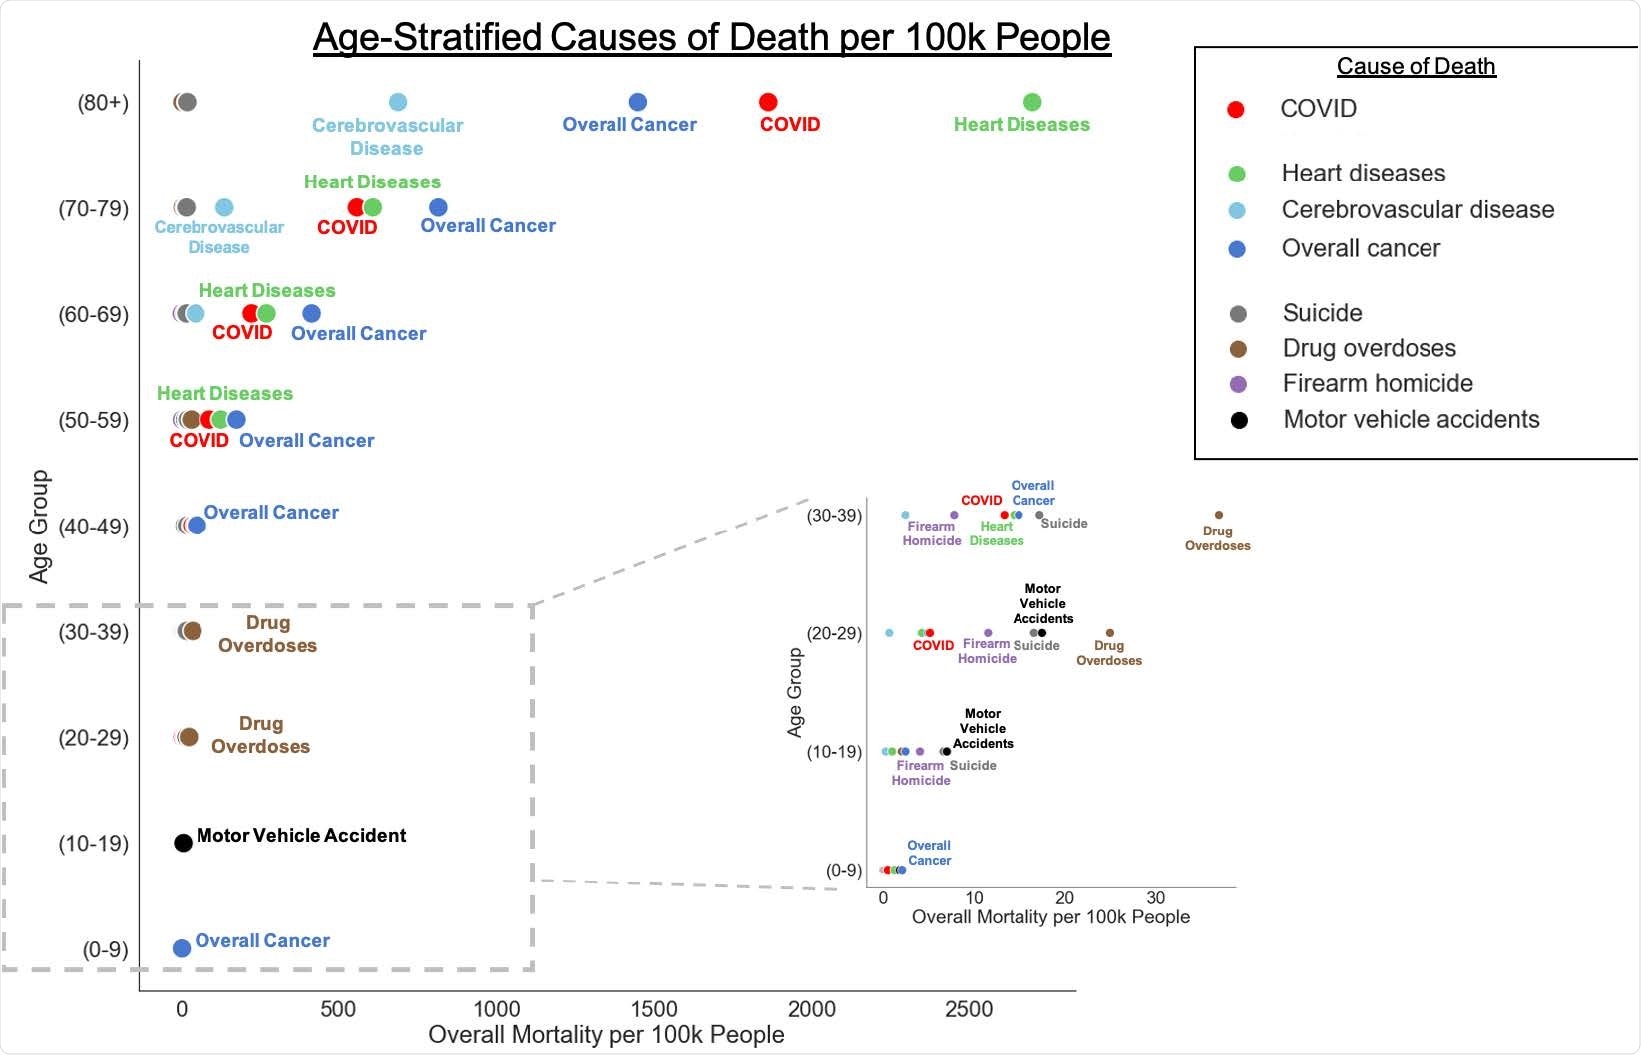 Mortality rates for leading causes of death in the United States stratified by age group. Comparison of causes of death per 100k people in a given age group, across all age groups. To better visualize mortality rates in the low-mortality age groups (ages 0 - 39), we have added a zoomed-in insert.